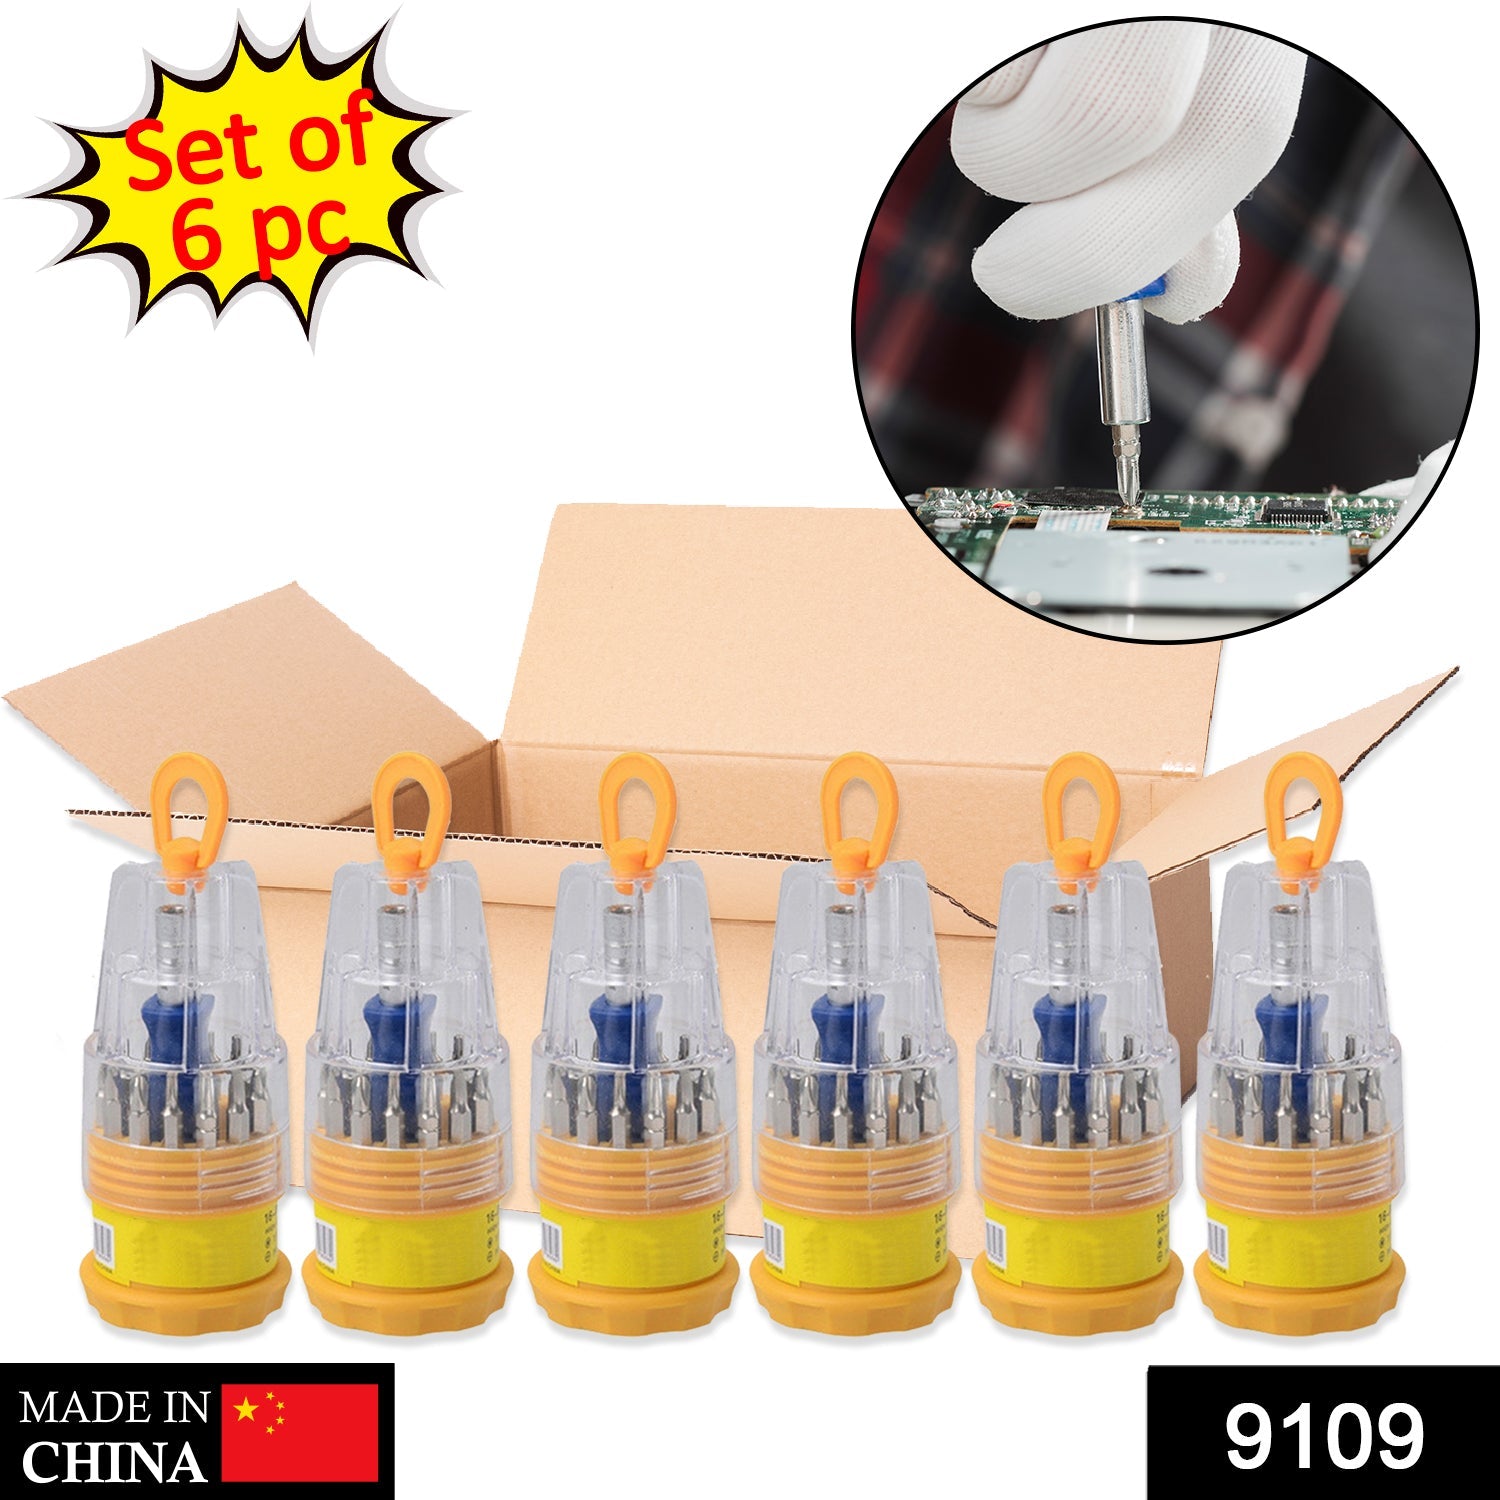 9109 (Set of 6pc) Screwdriver Set, Steel 16 in 1 with 15 Screwdriver Bits, Professional Magnetic Driver Set 